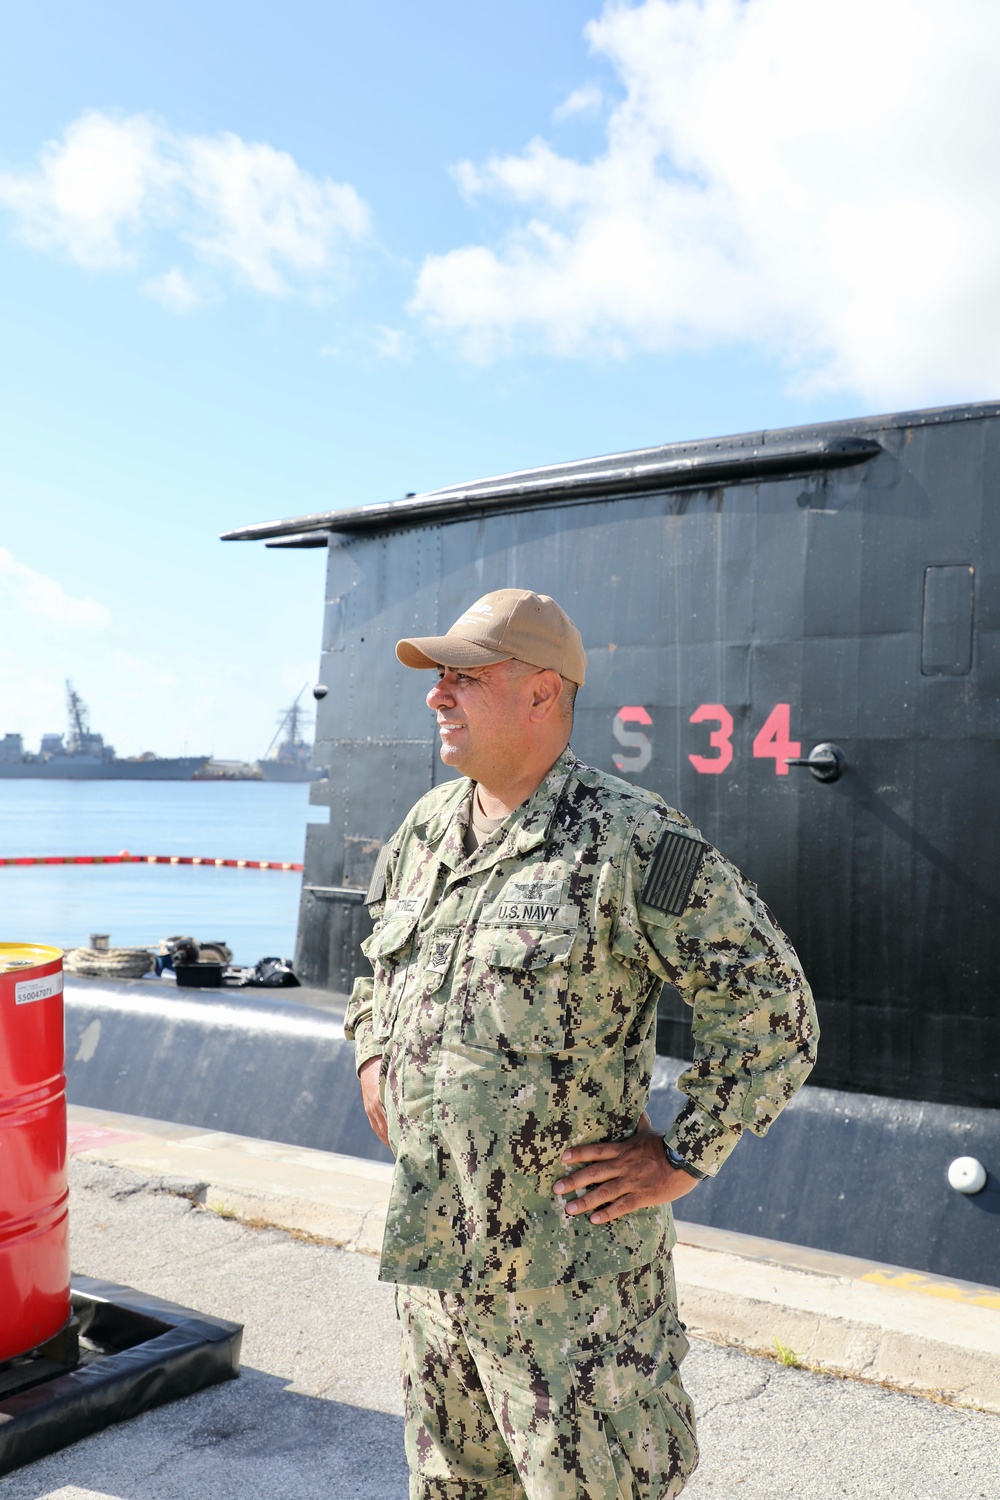 Catering to Two Foreign Submarines is Full-time Job for Mayport Logistics Team